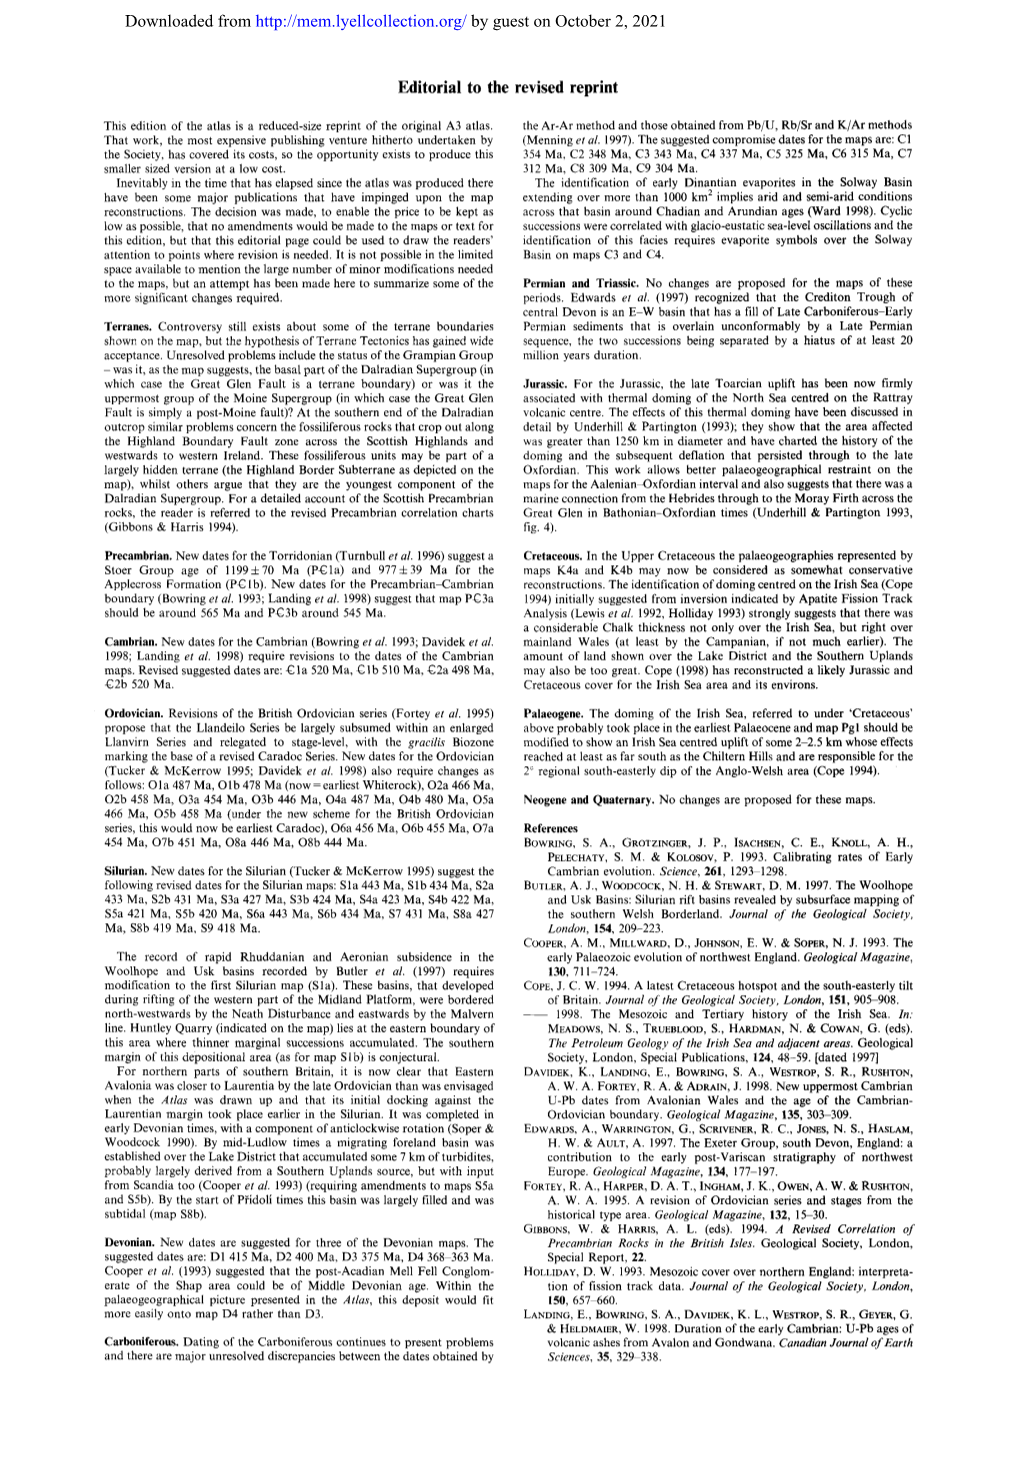 Editorial to the Revised Reprint